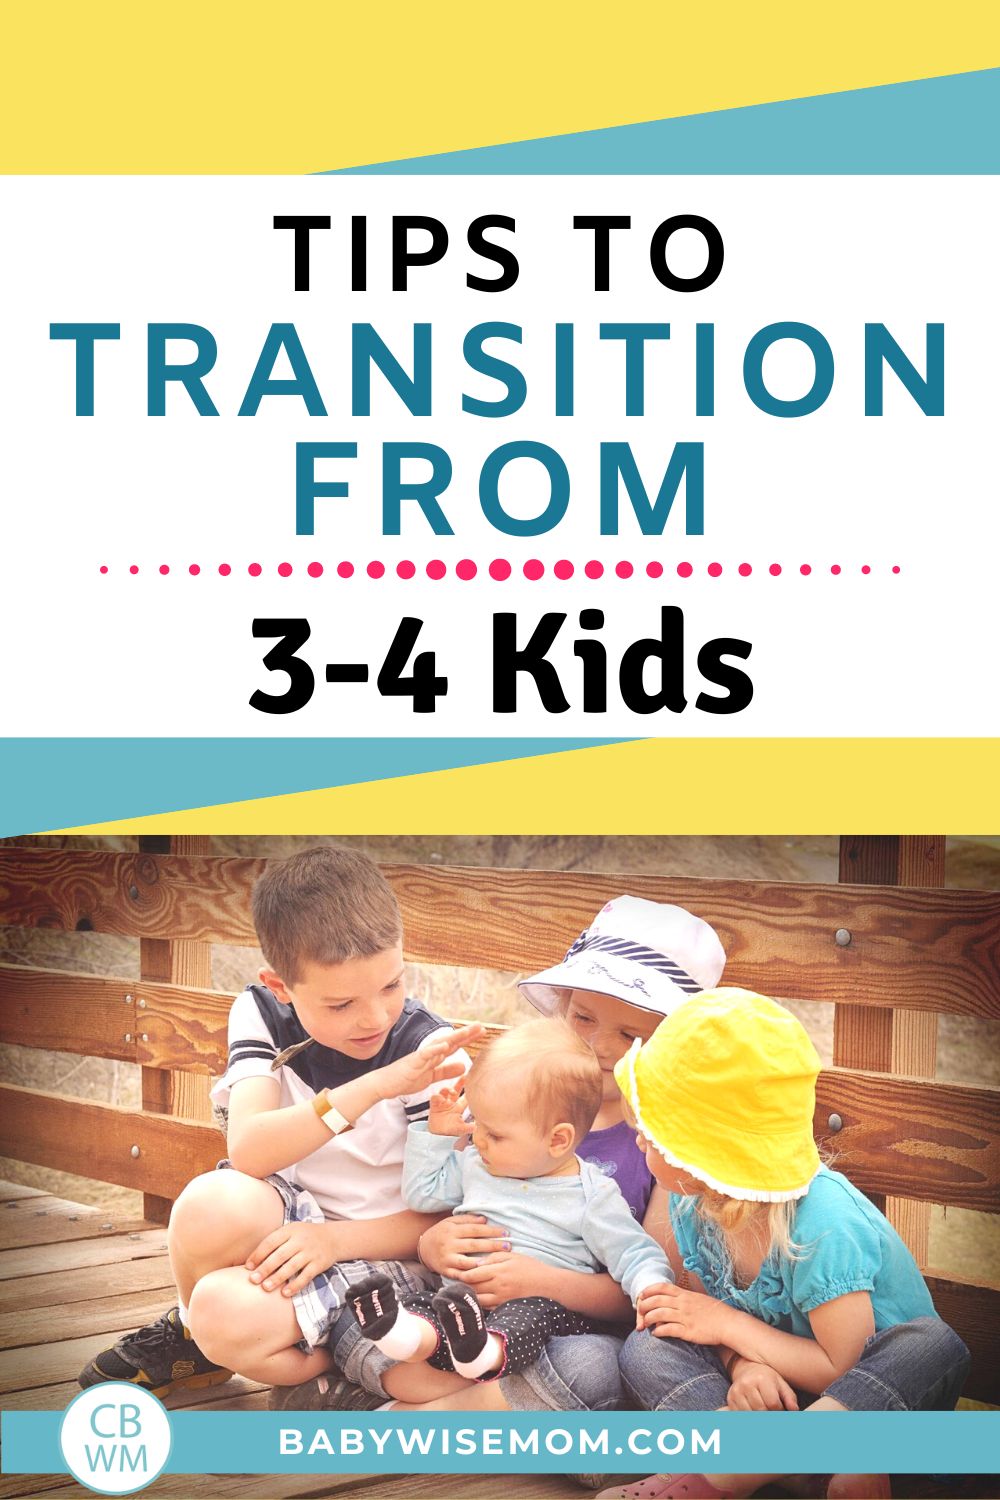 3-4 tips to transition from 3-4 kids pinnable image